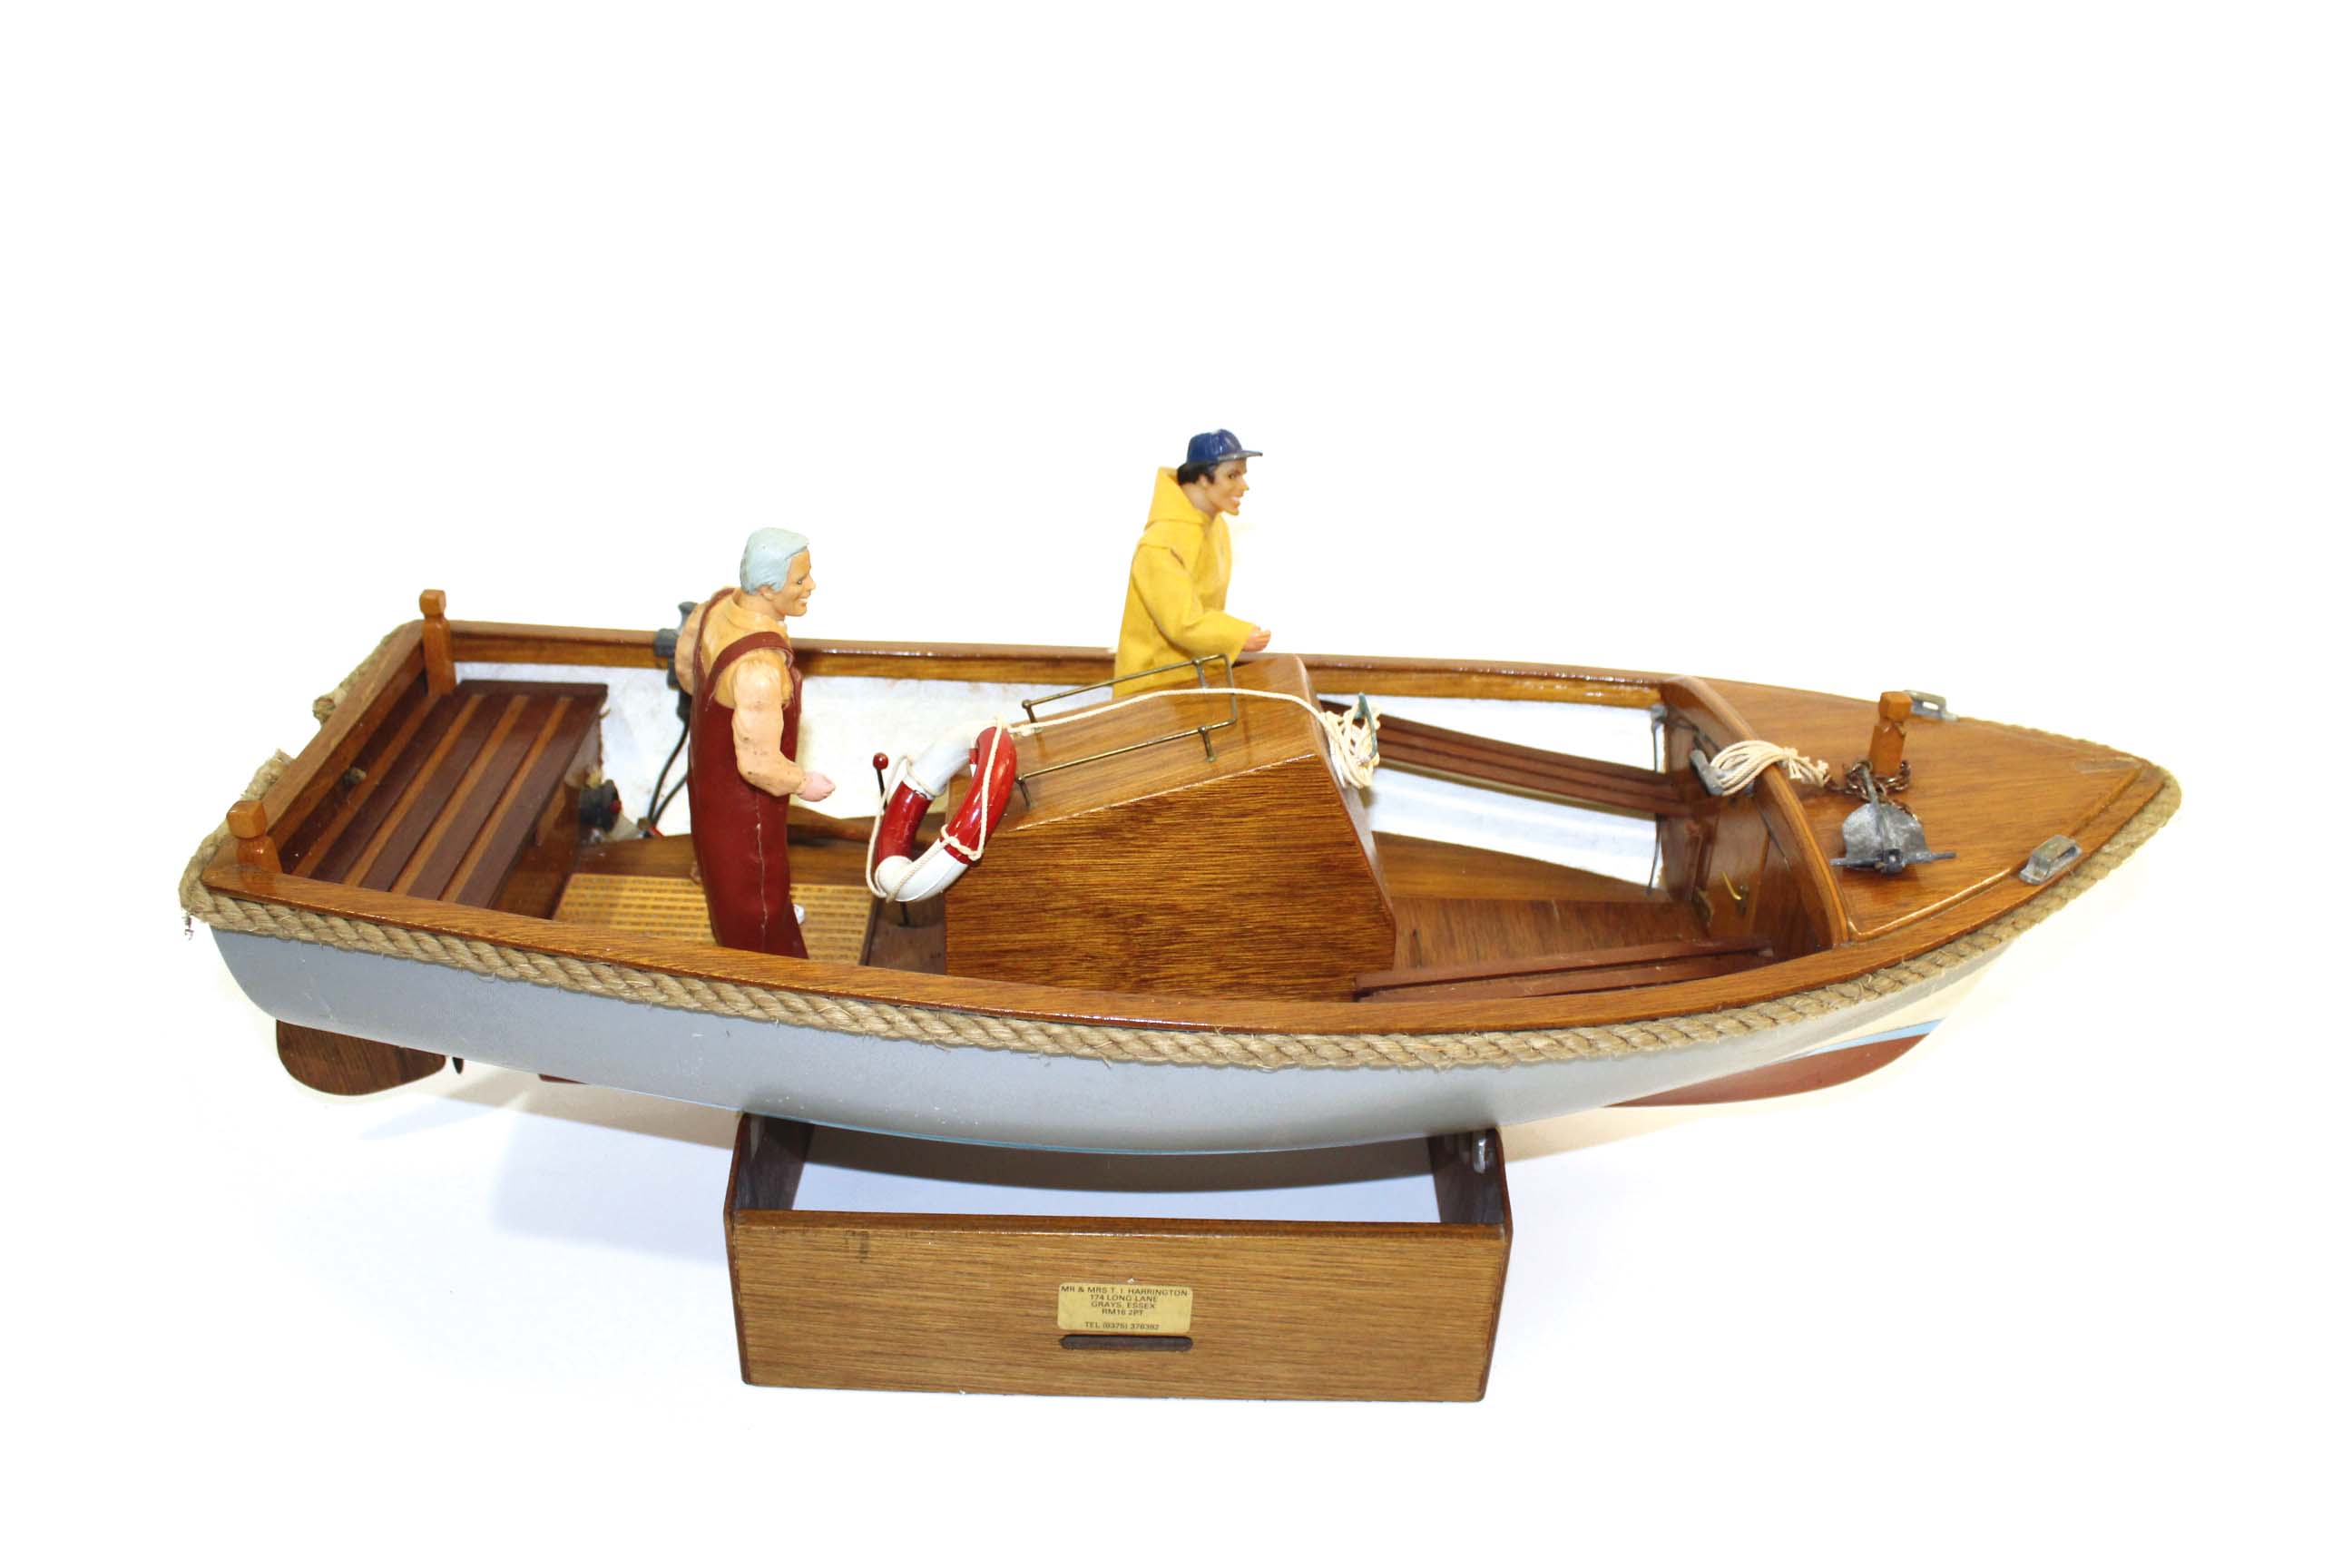 MODEL FISHING BOAT - REMOTE CONTROL a model fishing boat with fibreglass hull and wooden deck,